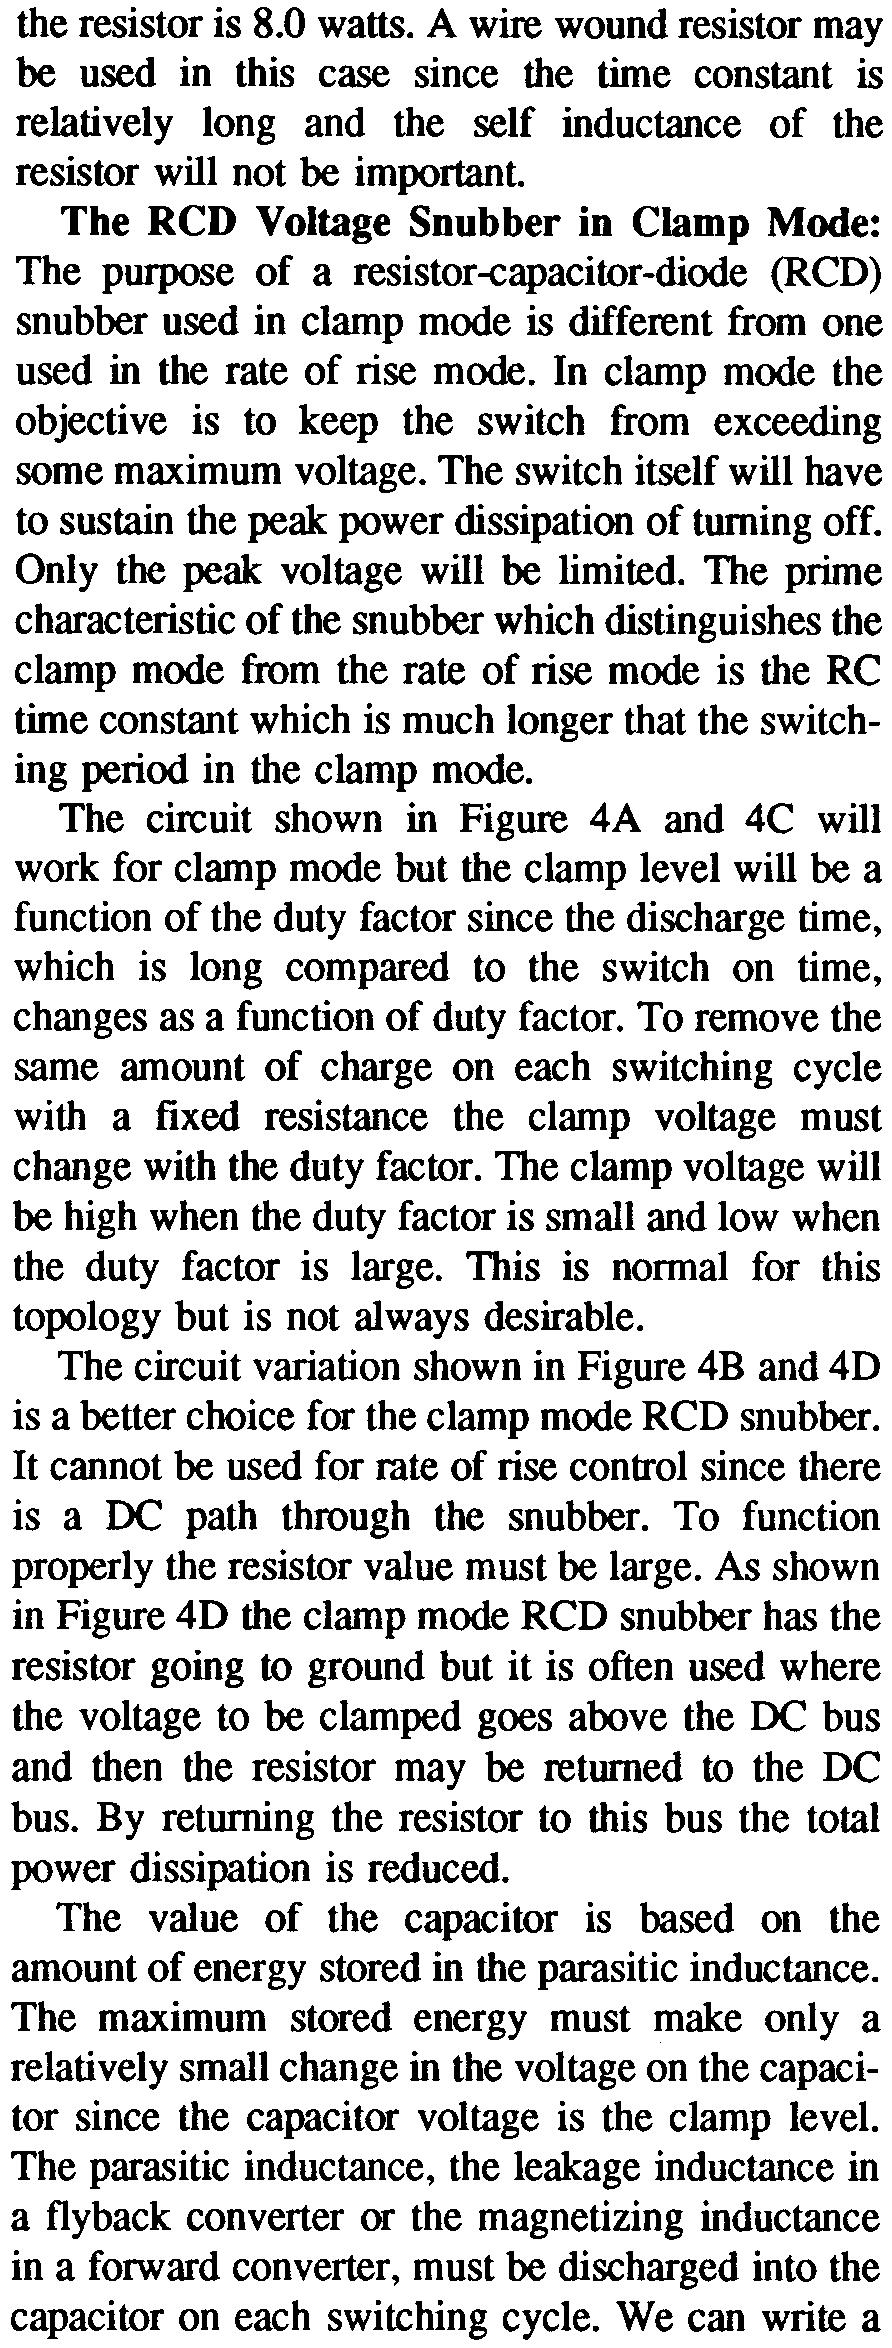 The prime characteristic of the snubber which distinguishes the clamp mode from the rate of rise mode is the RC time constant which is much longer that the switching period in the clamp mode.